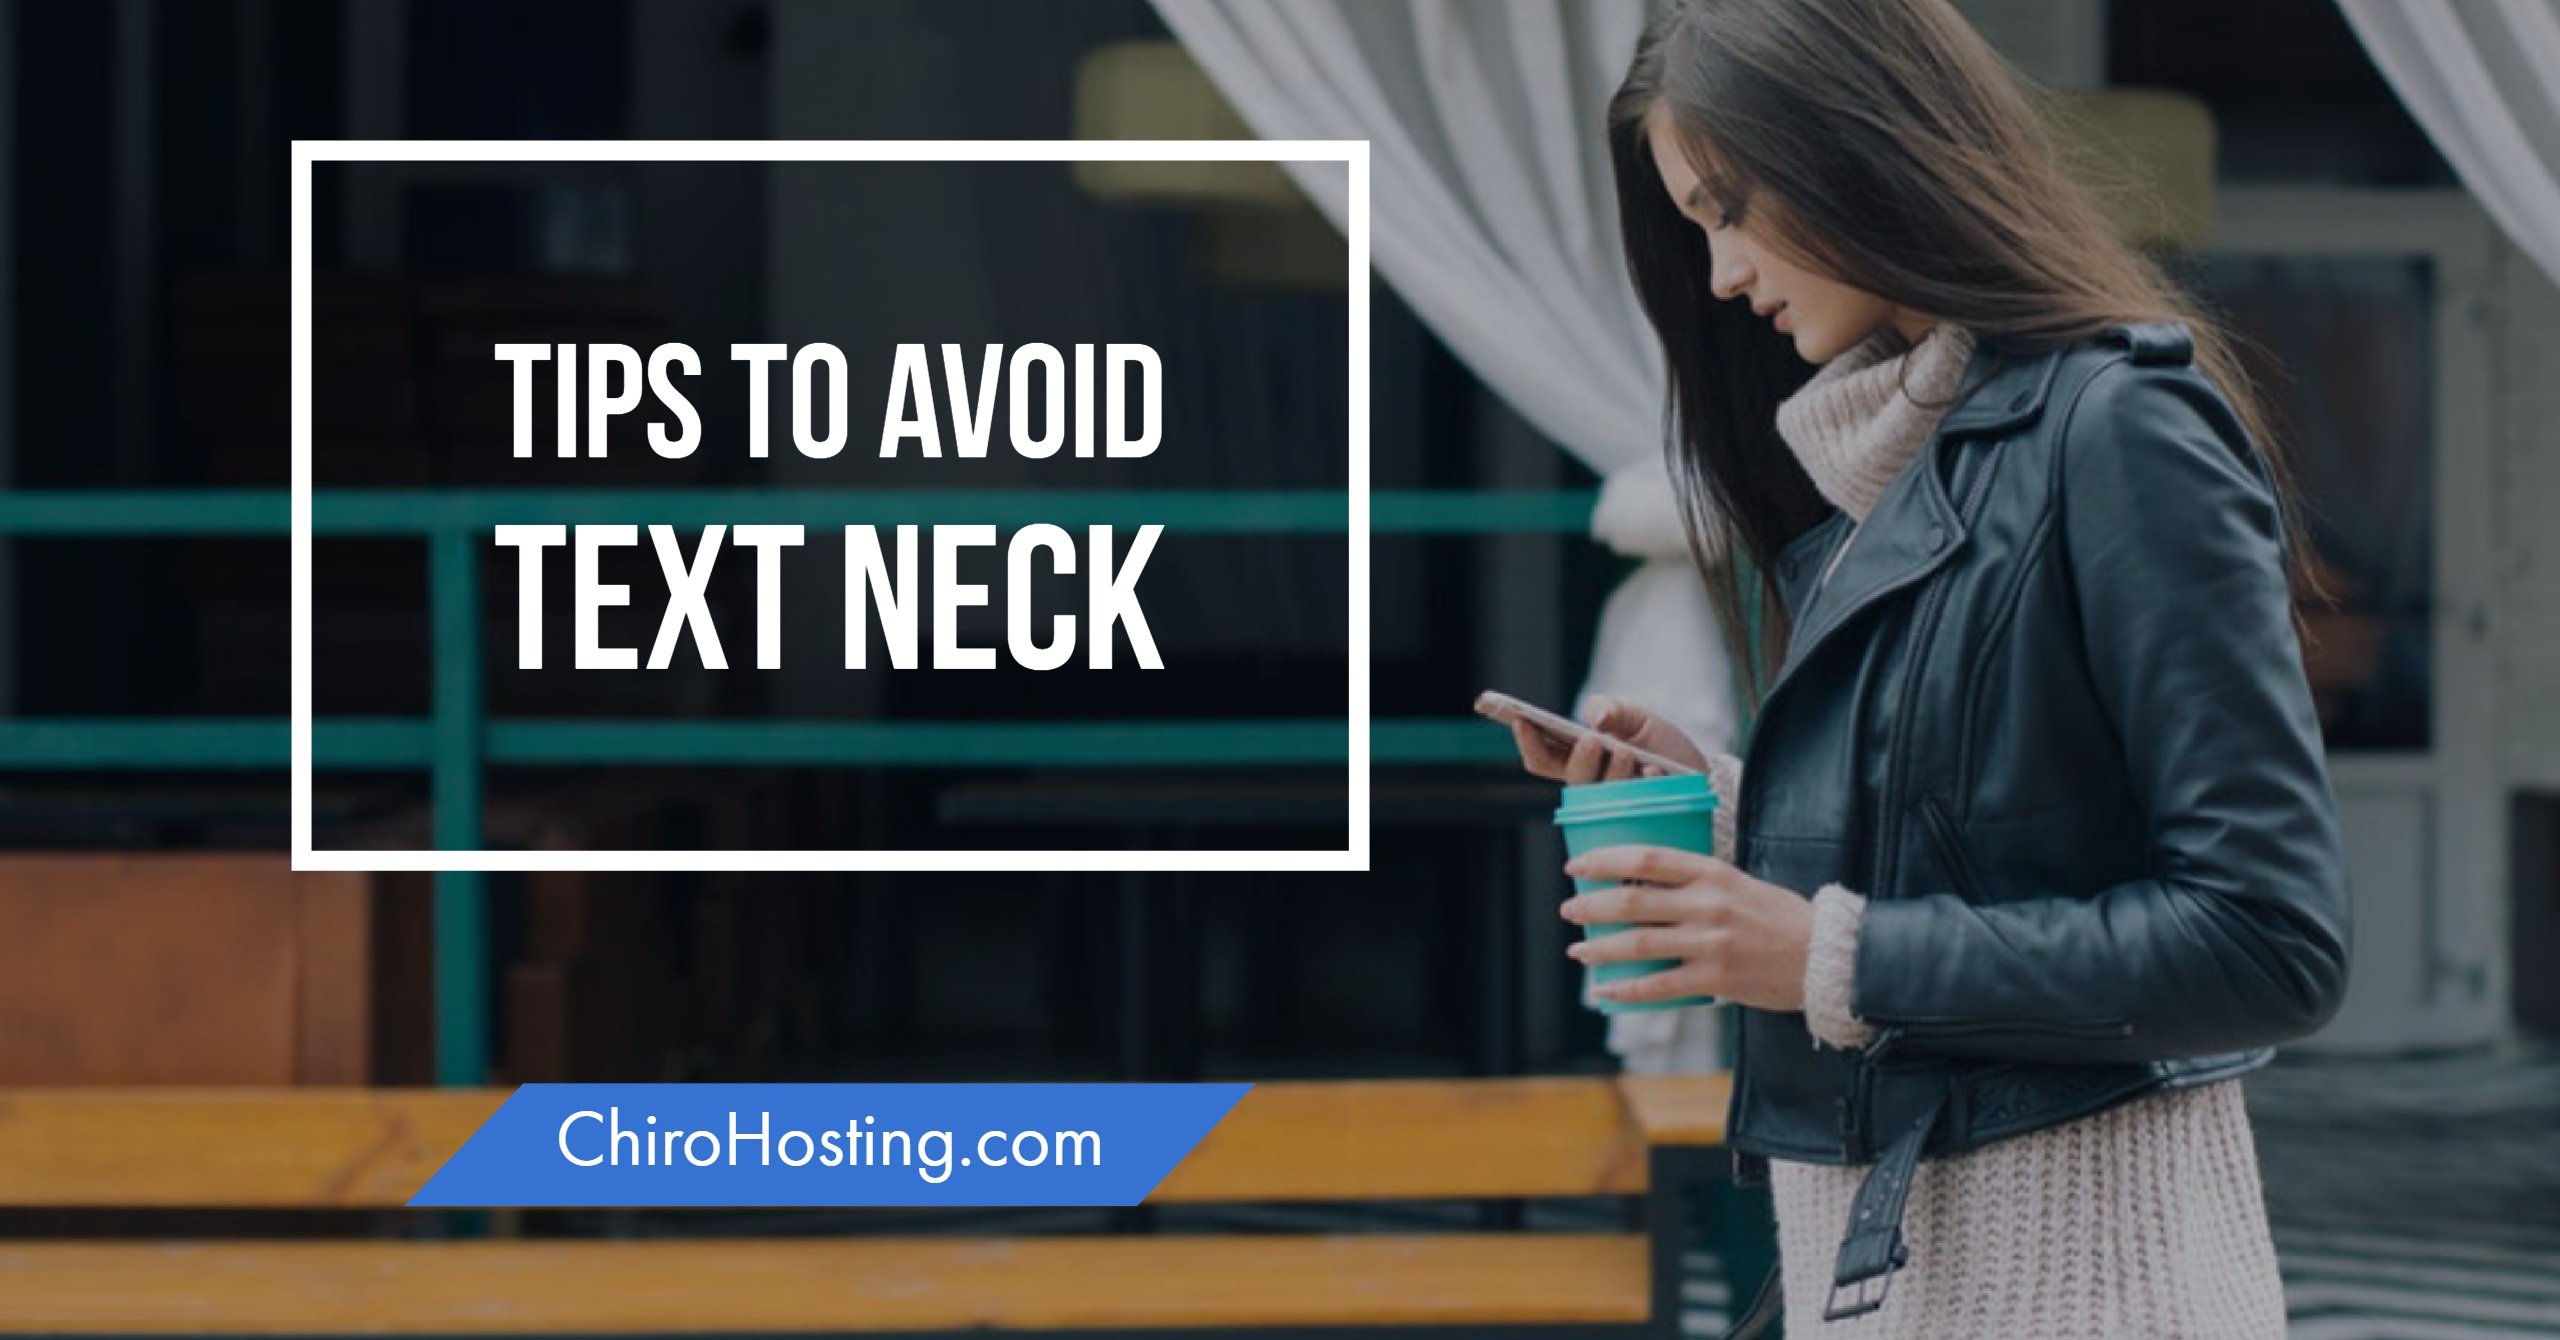 Tips to Avoid Text Neck